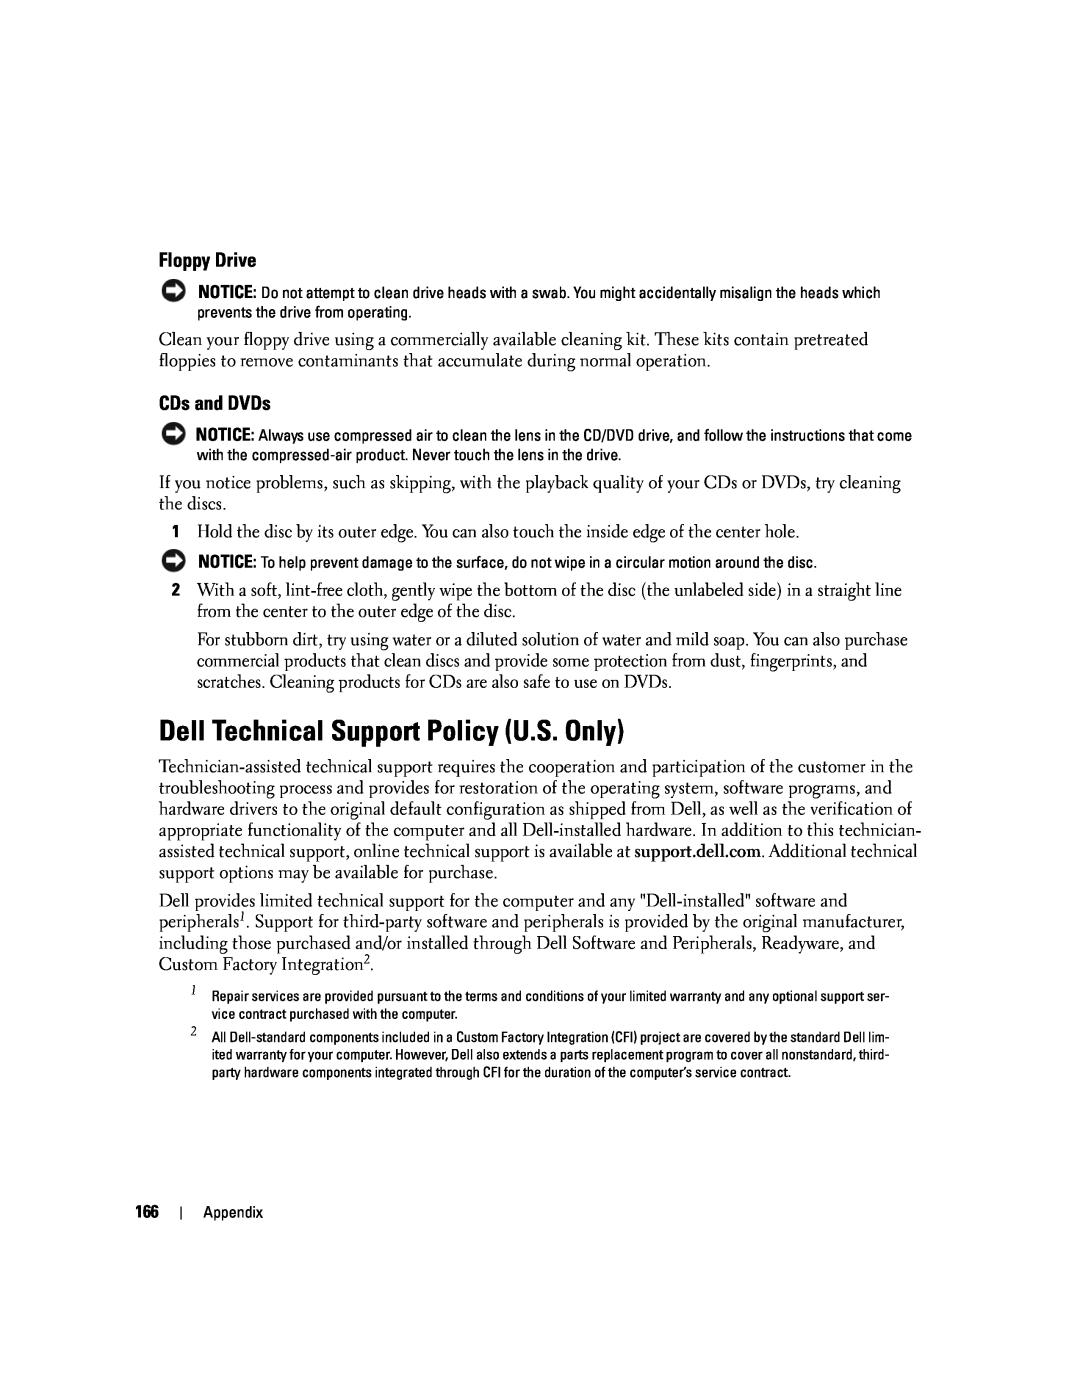 Dell PP20L owner manual Dell Technical Support Policy U.S. Only, Floppy Drive, CDs and DVDs 